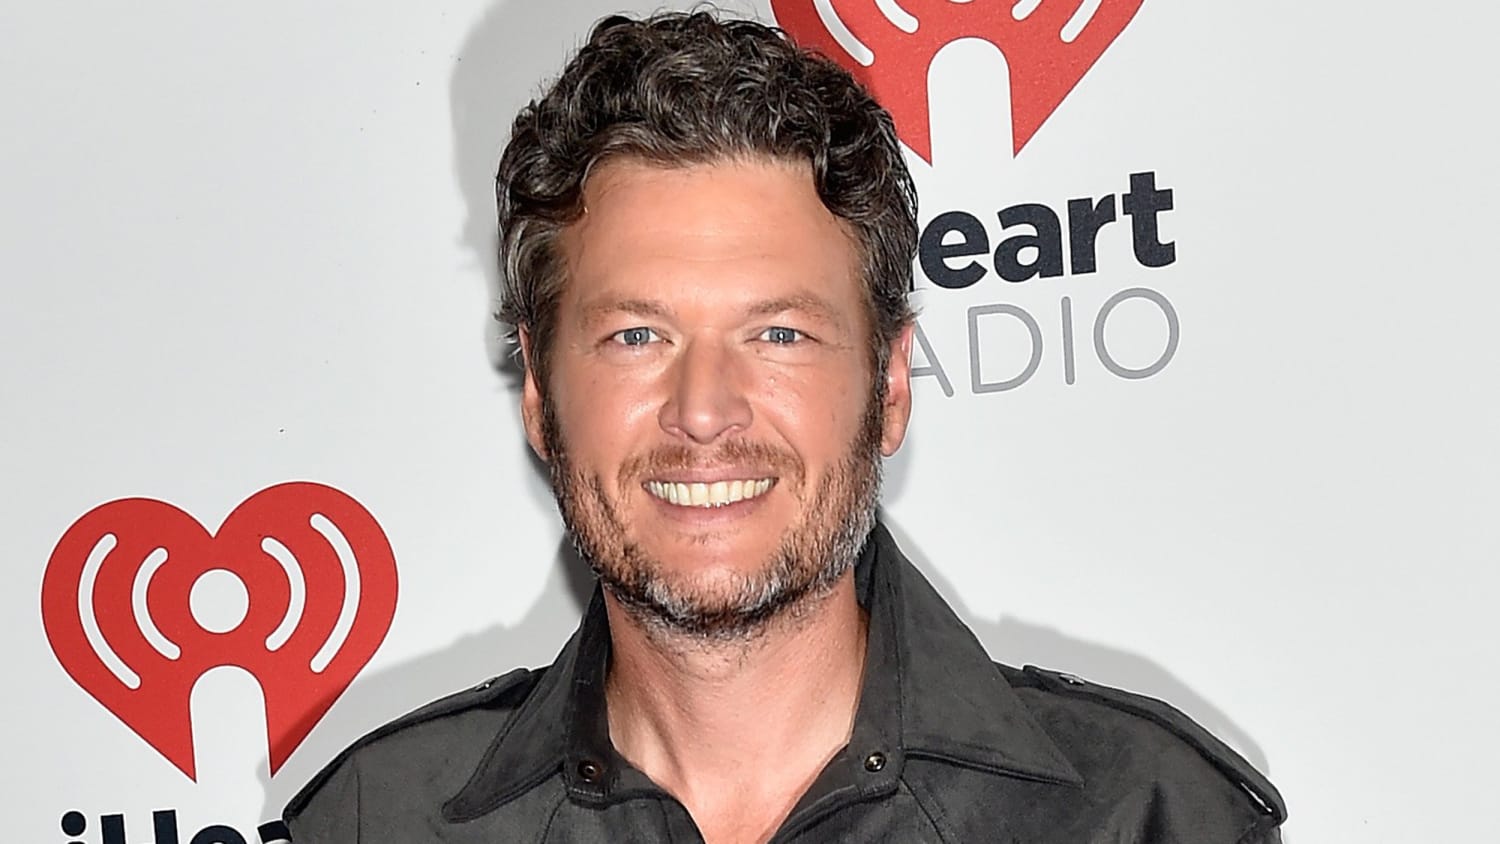 Blake Shelton Makes Wish Come True For Special Fan